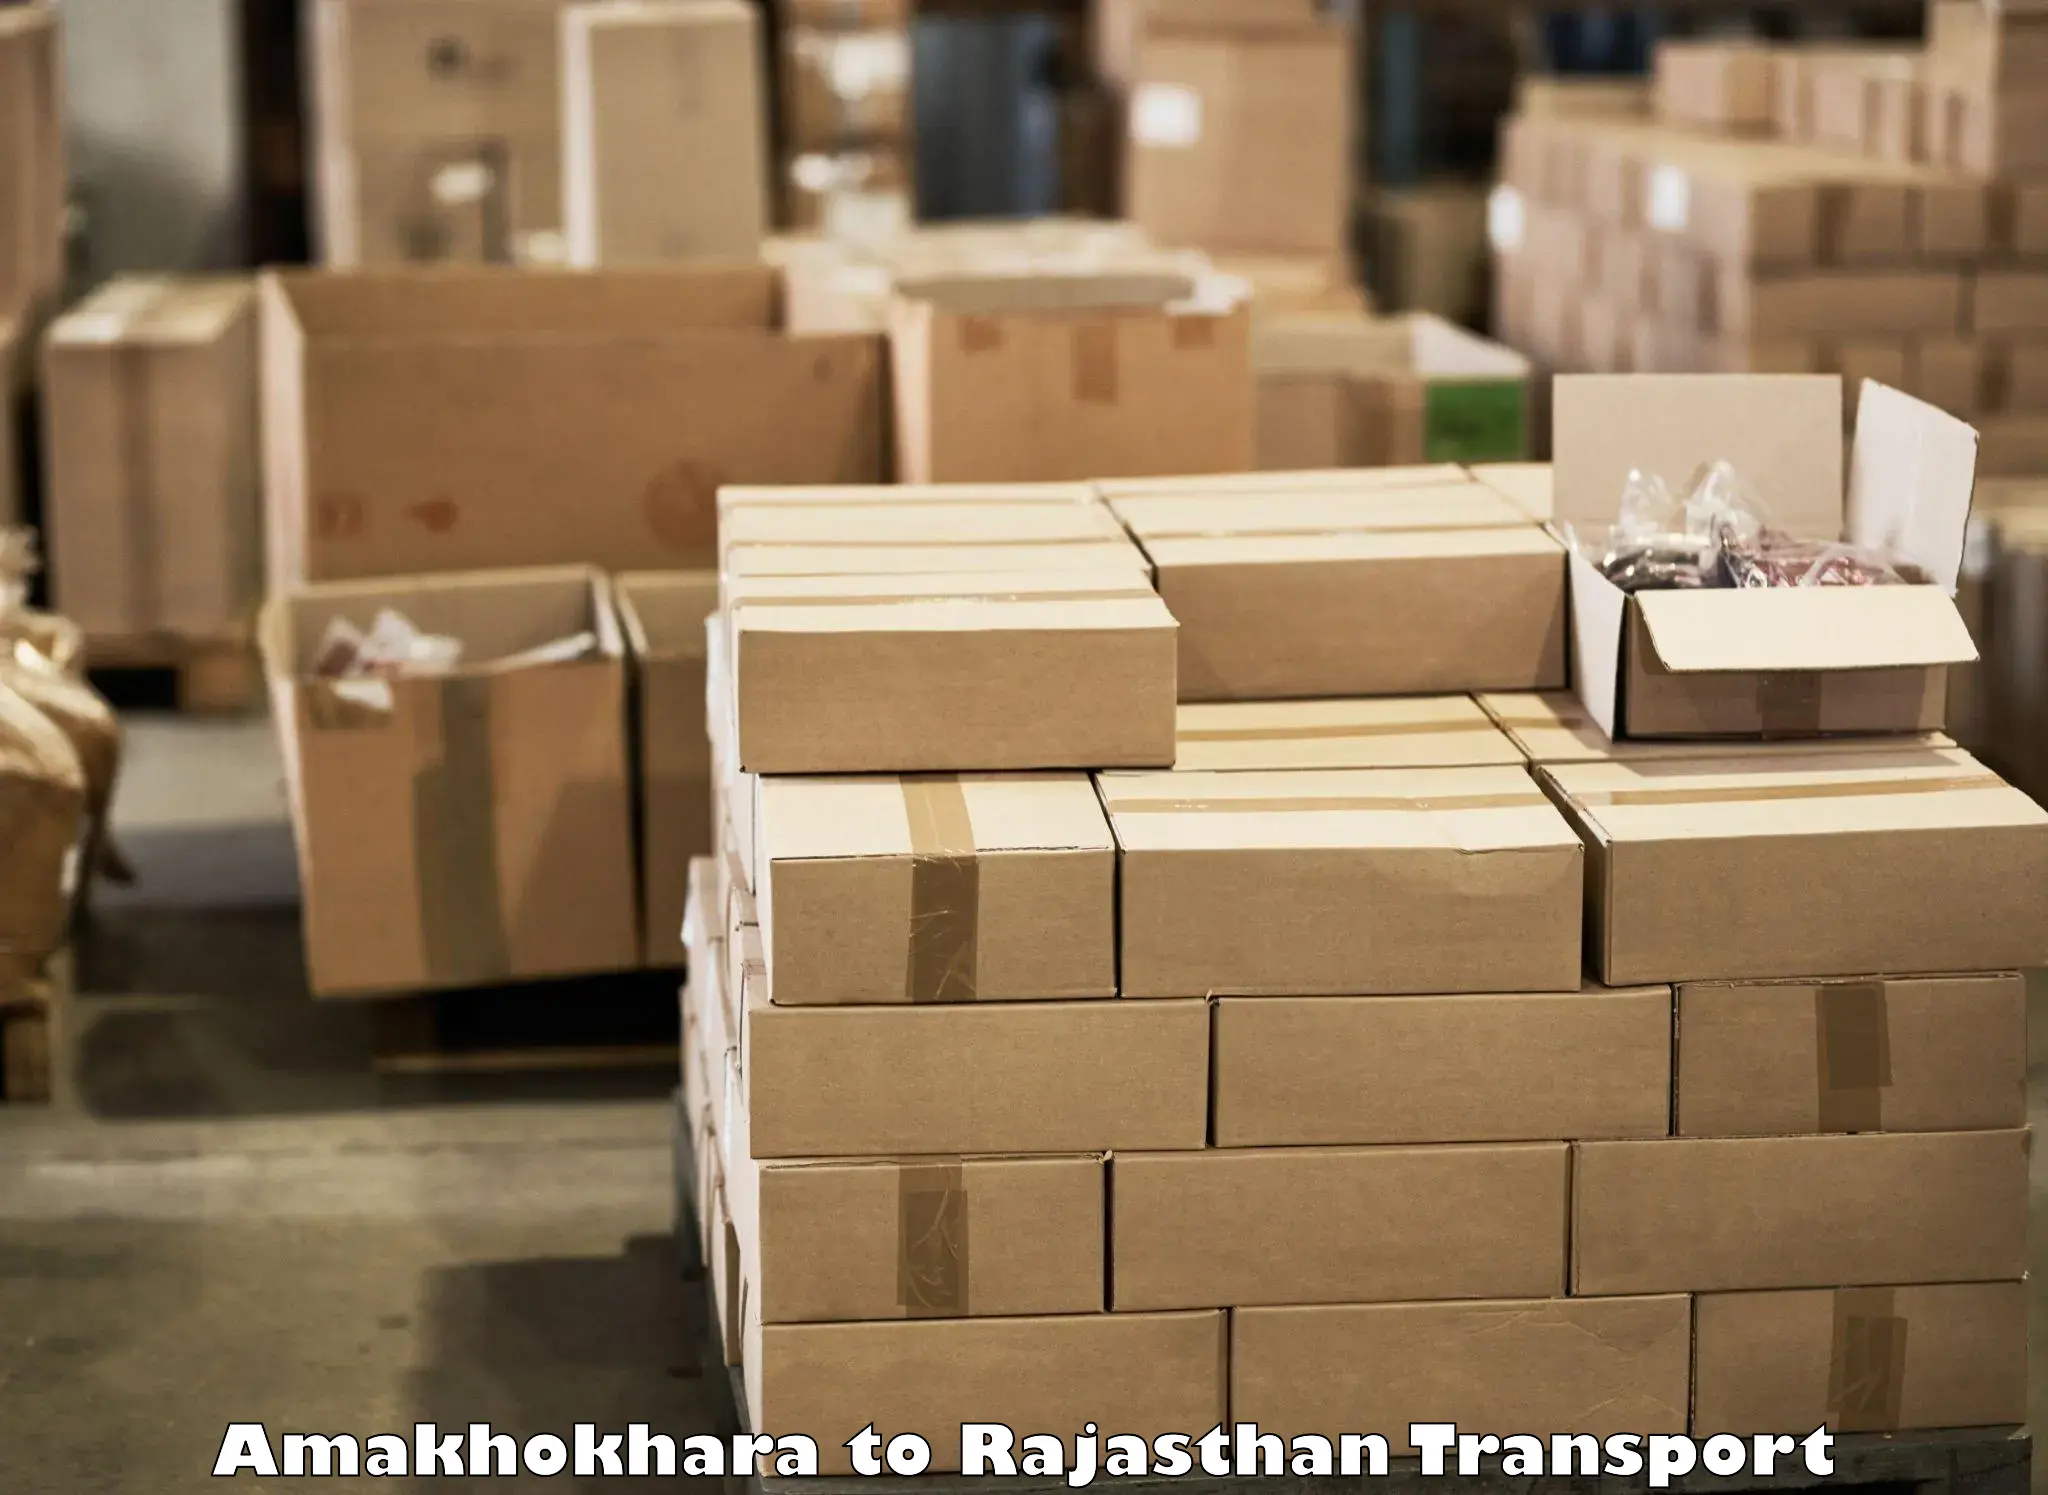 Goods delivery service Amakhokhara to Bhatewar